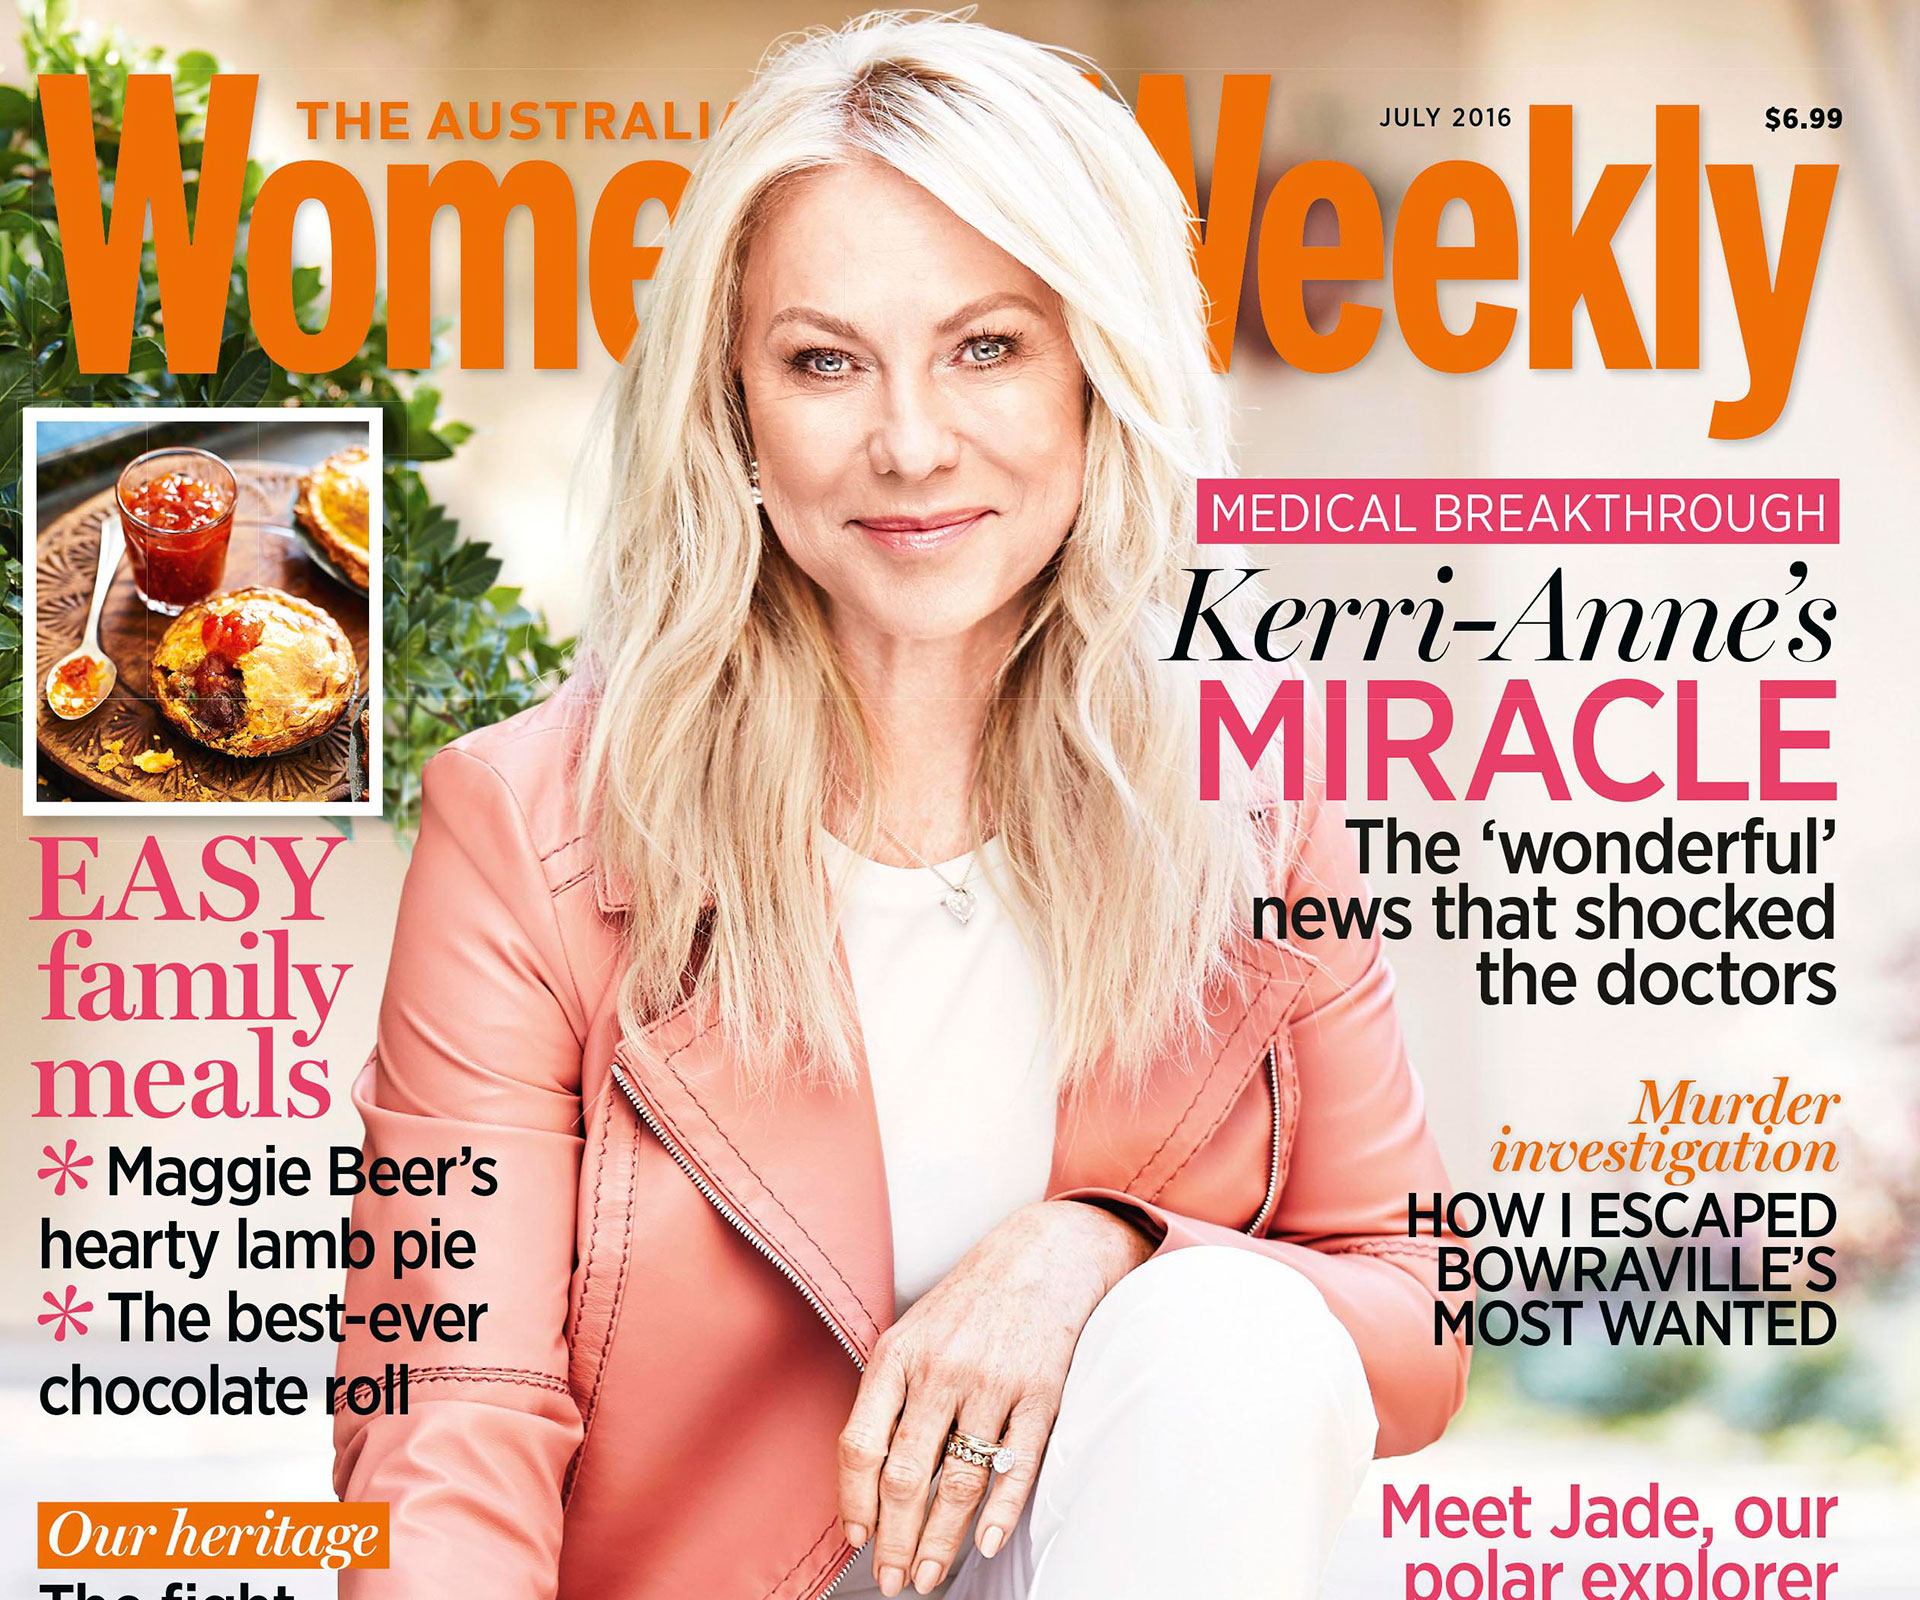 Kerri-Anne’s miracle: The news that shocked doctors